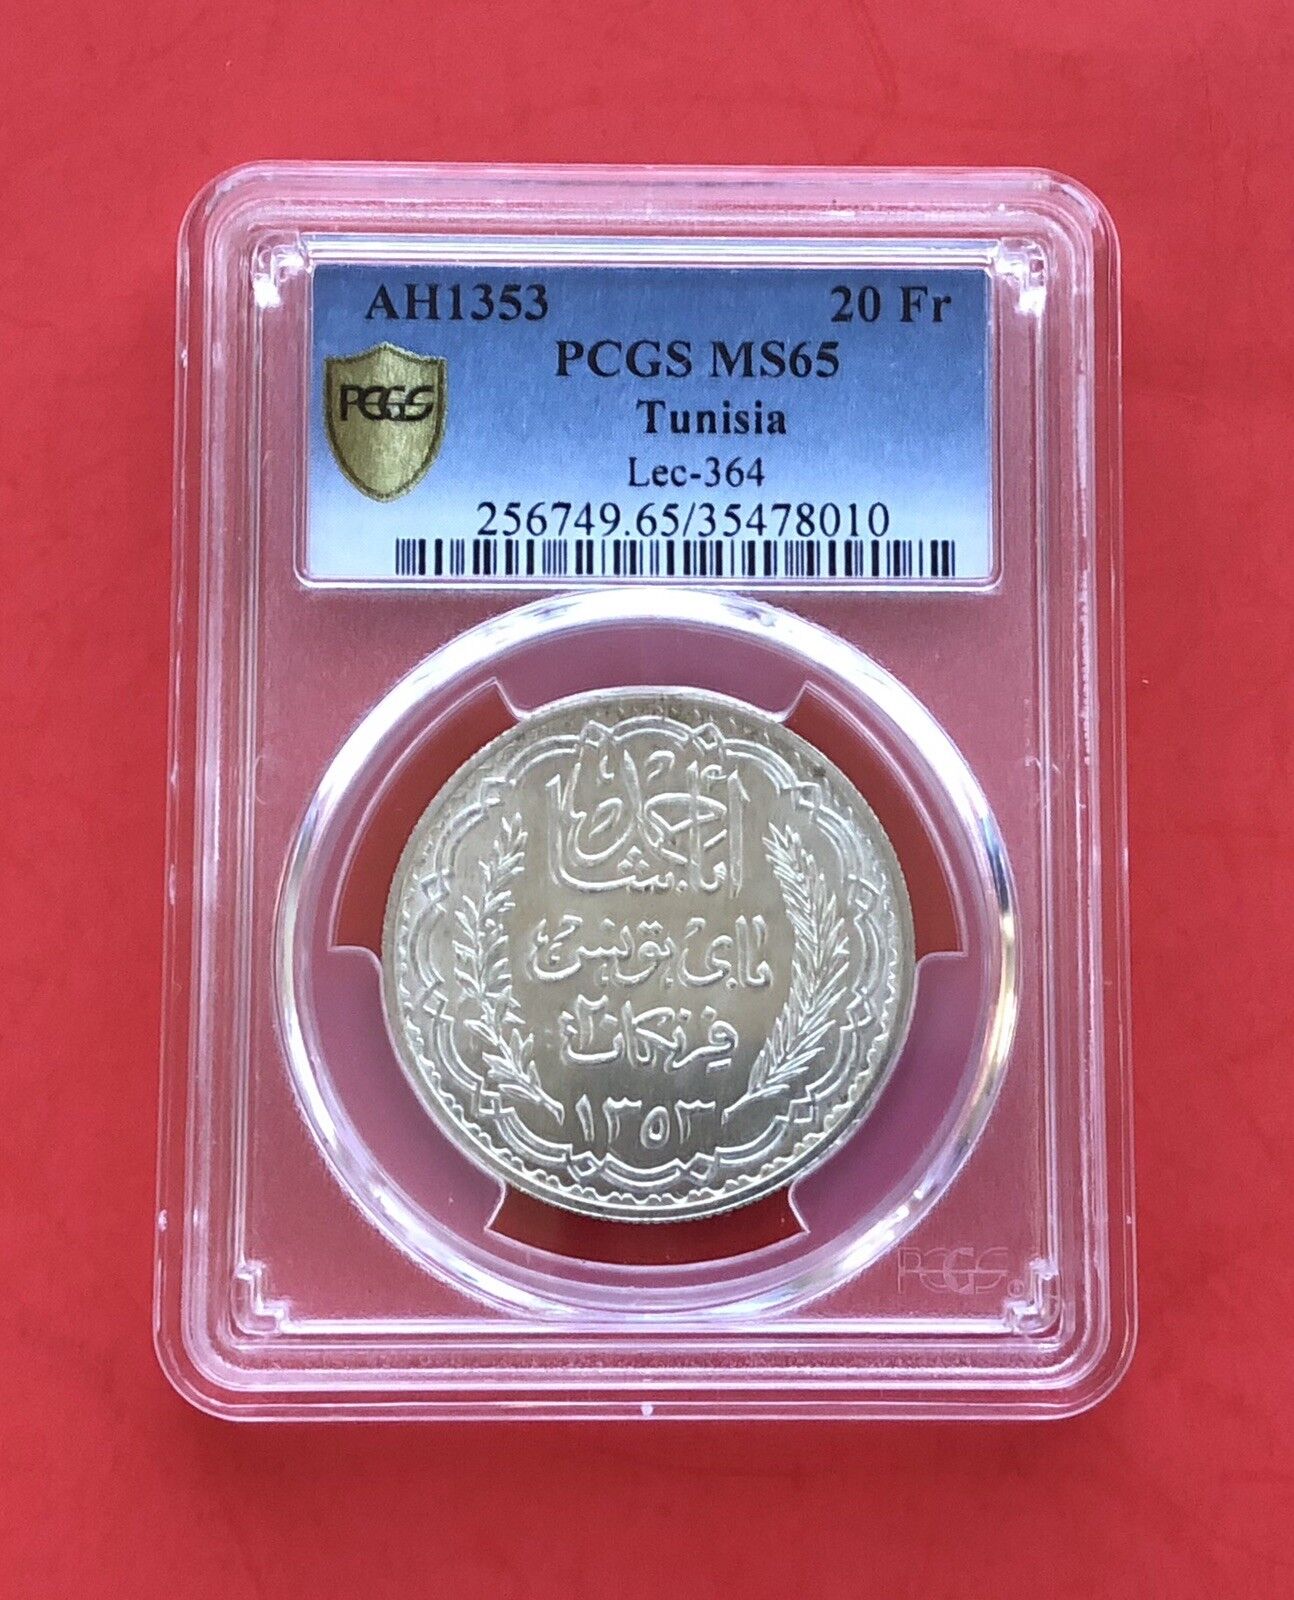 Tunisia—ah 1353(ad1934 )silver Coi 20 Fr.,graded By Pcgs Ms65.rare! Low Mintage